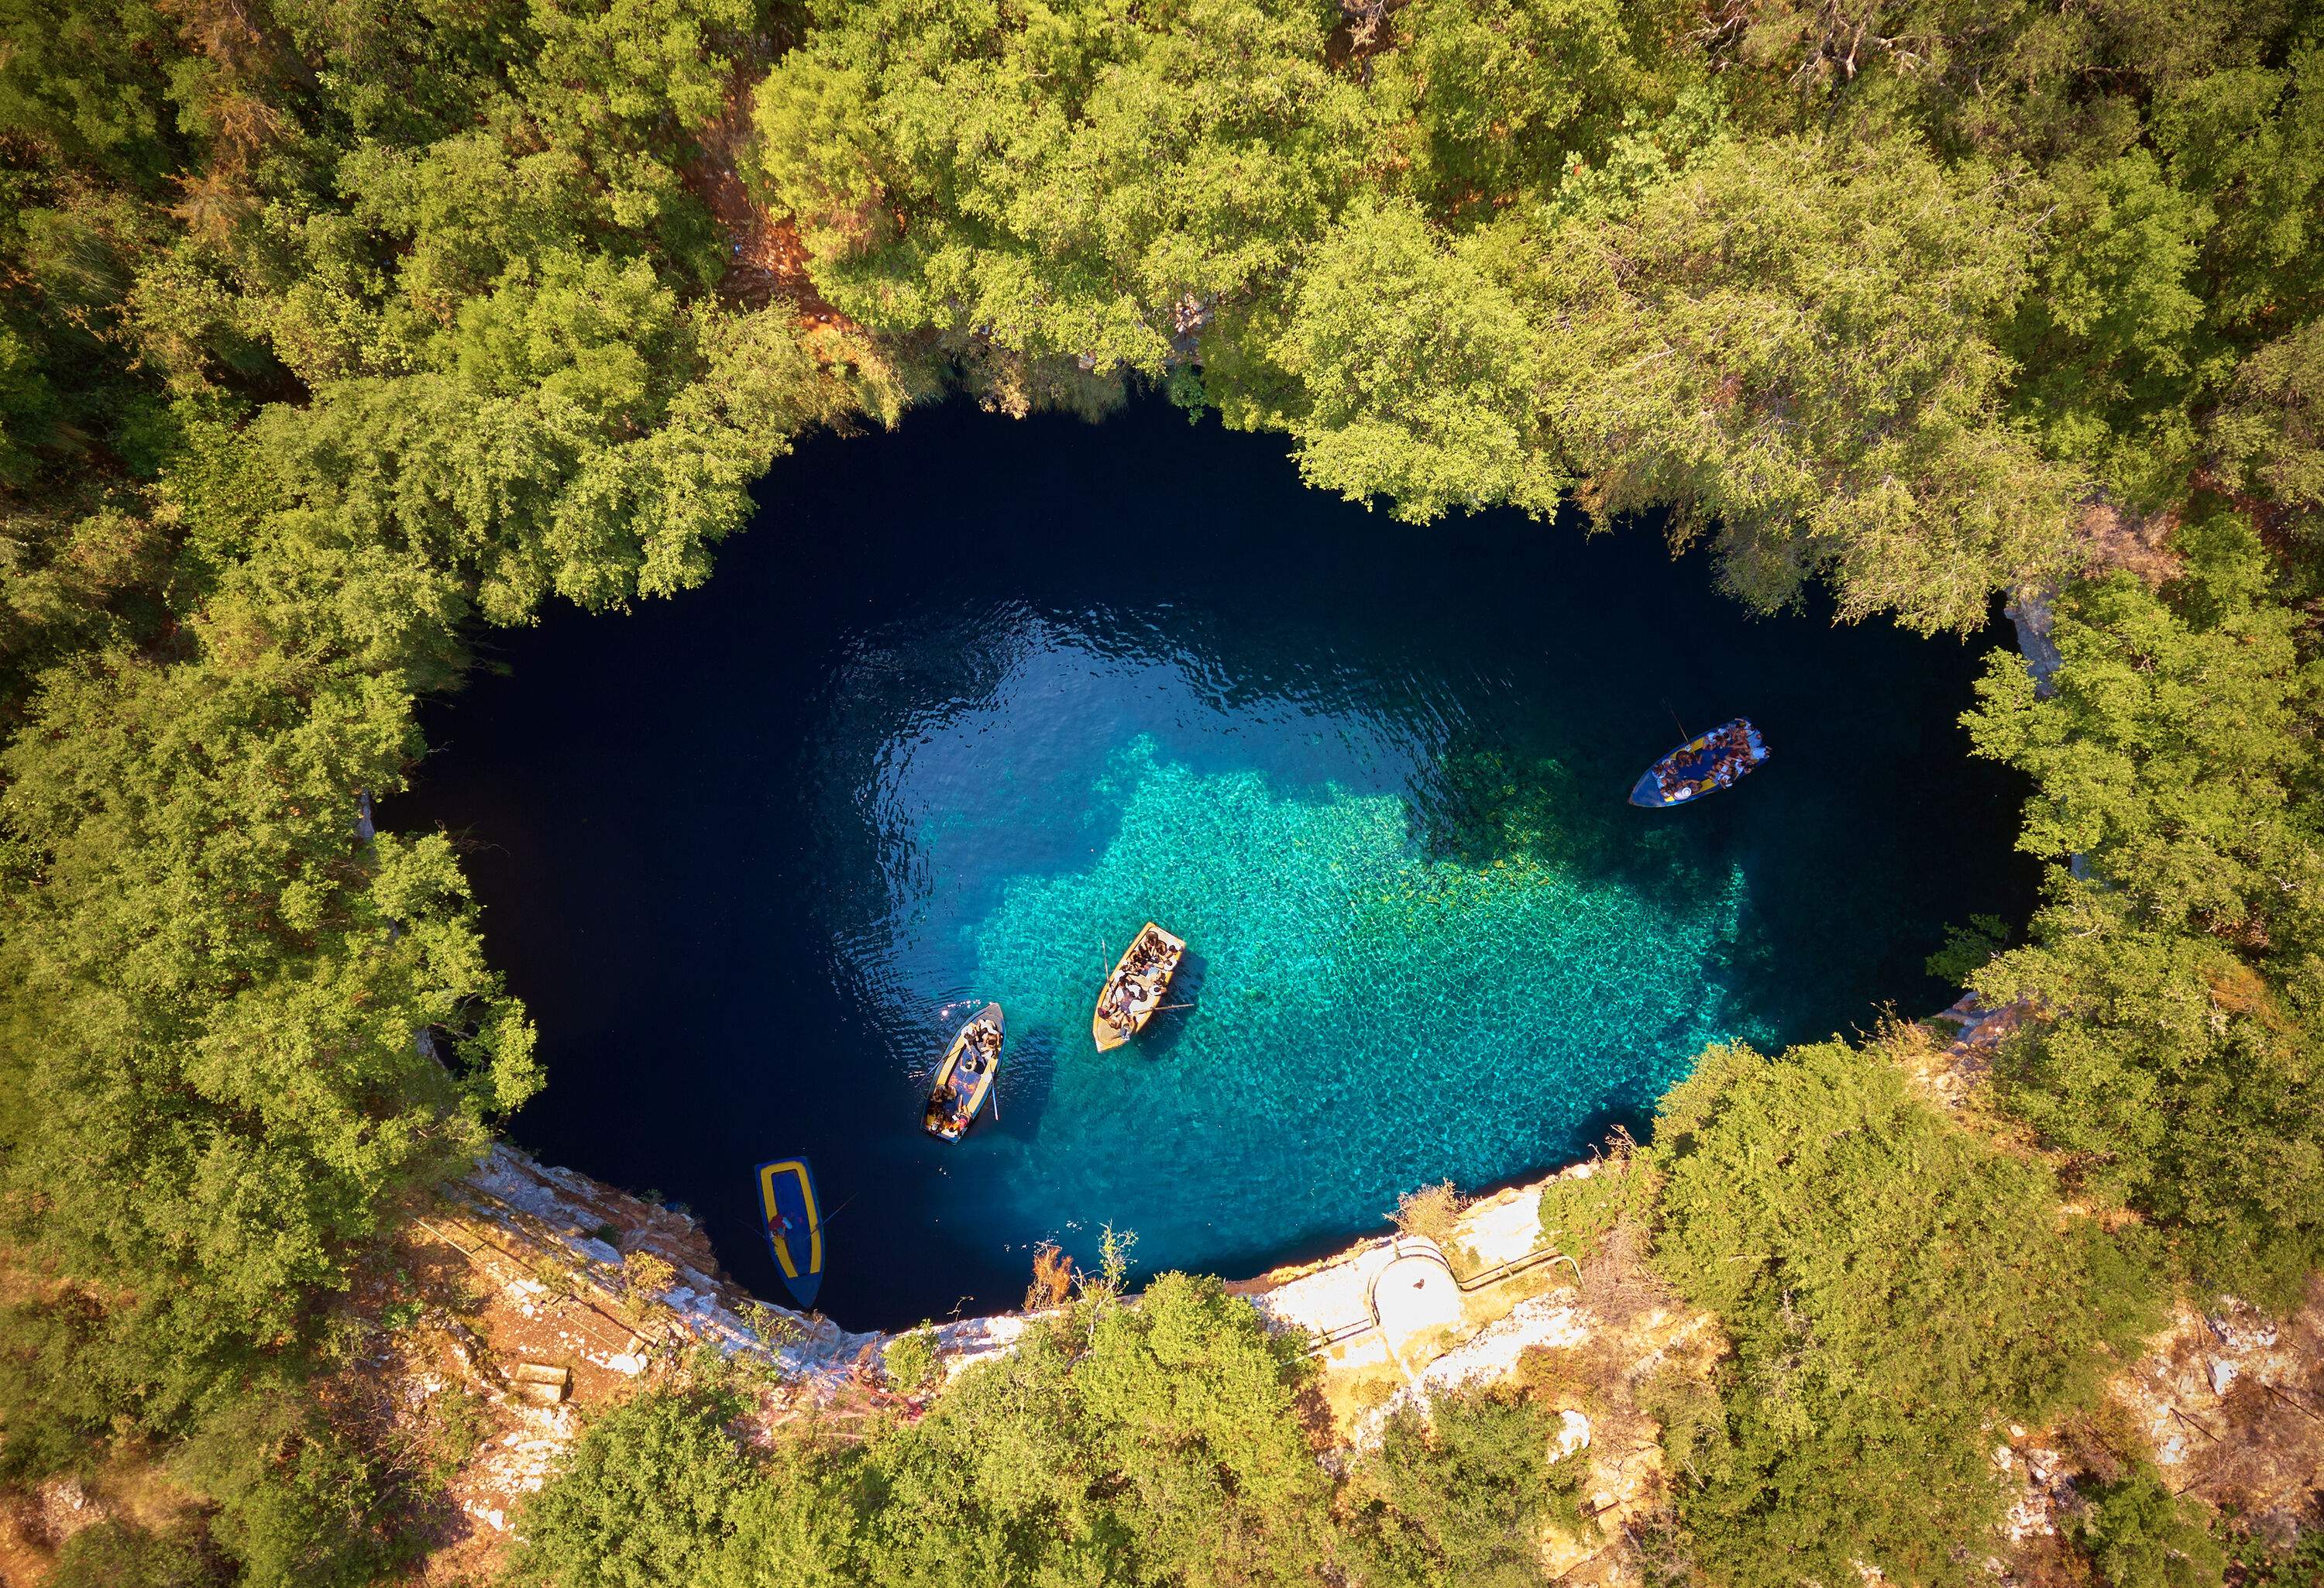 Aerial view of boats inside the cave surrounded by lush forest on a cliff.